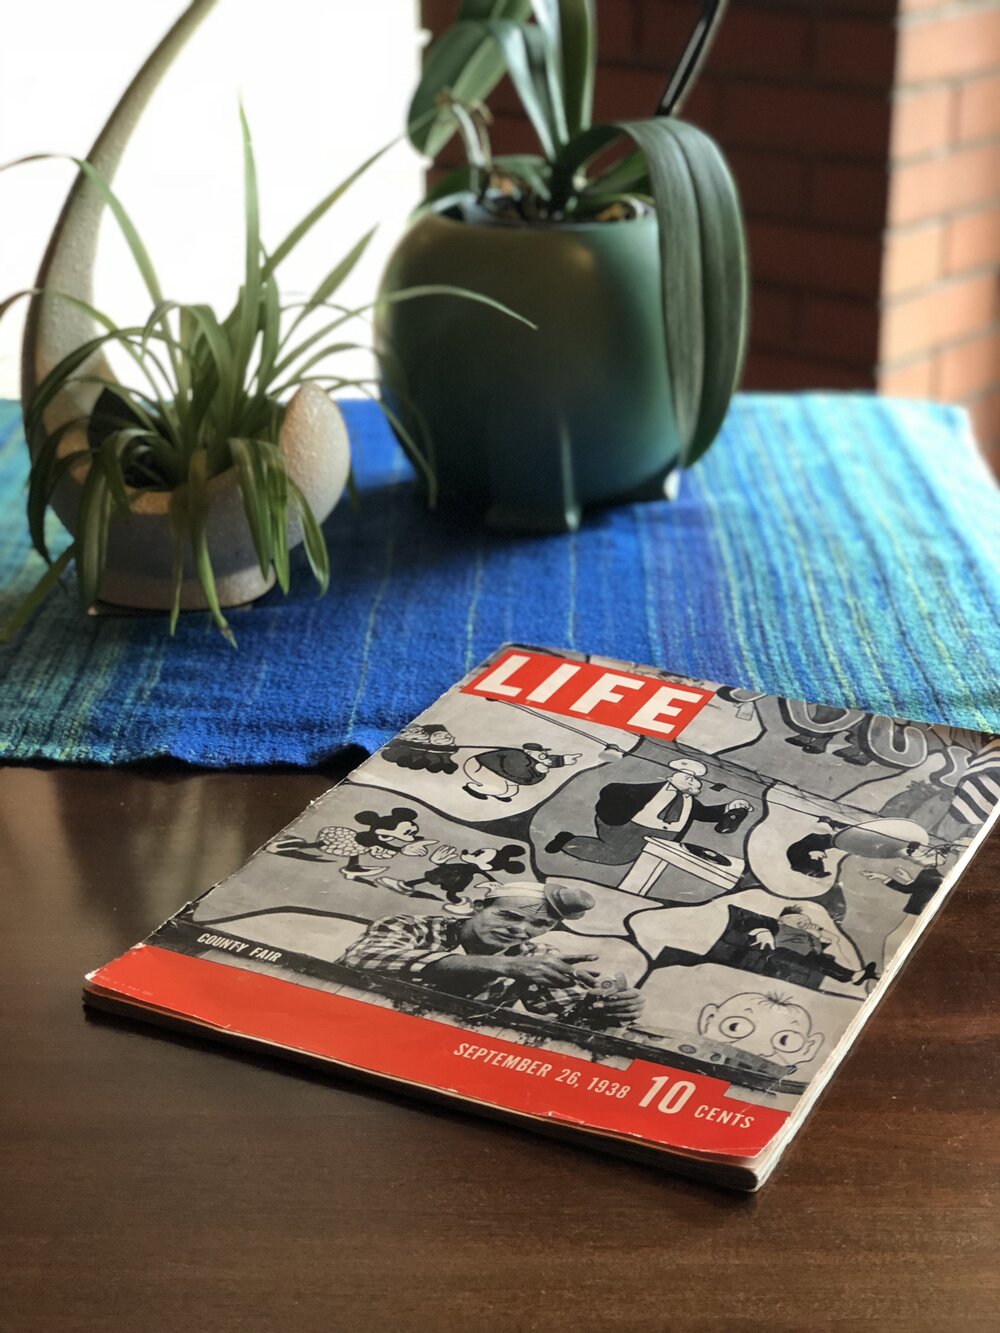 A copy of the LIFE magazine that featured the original plans for the house